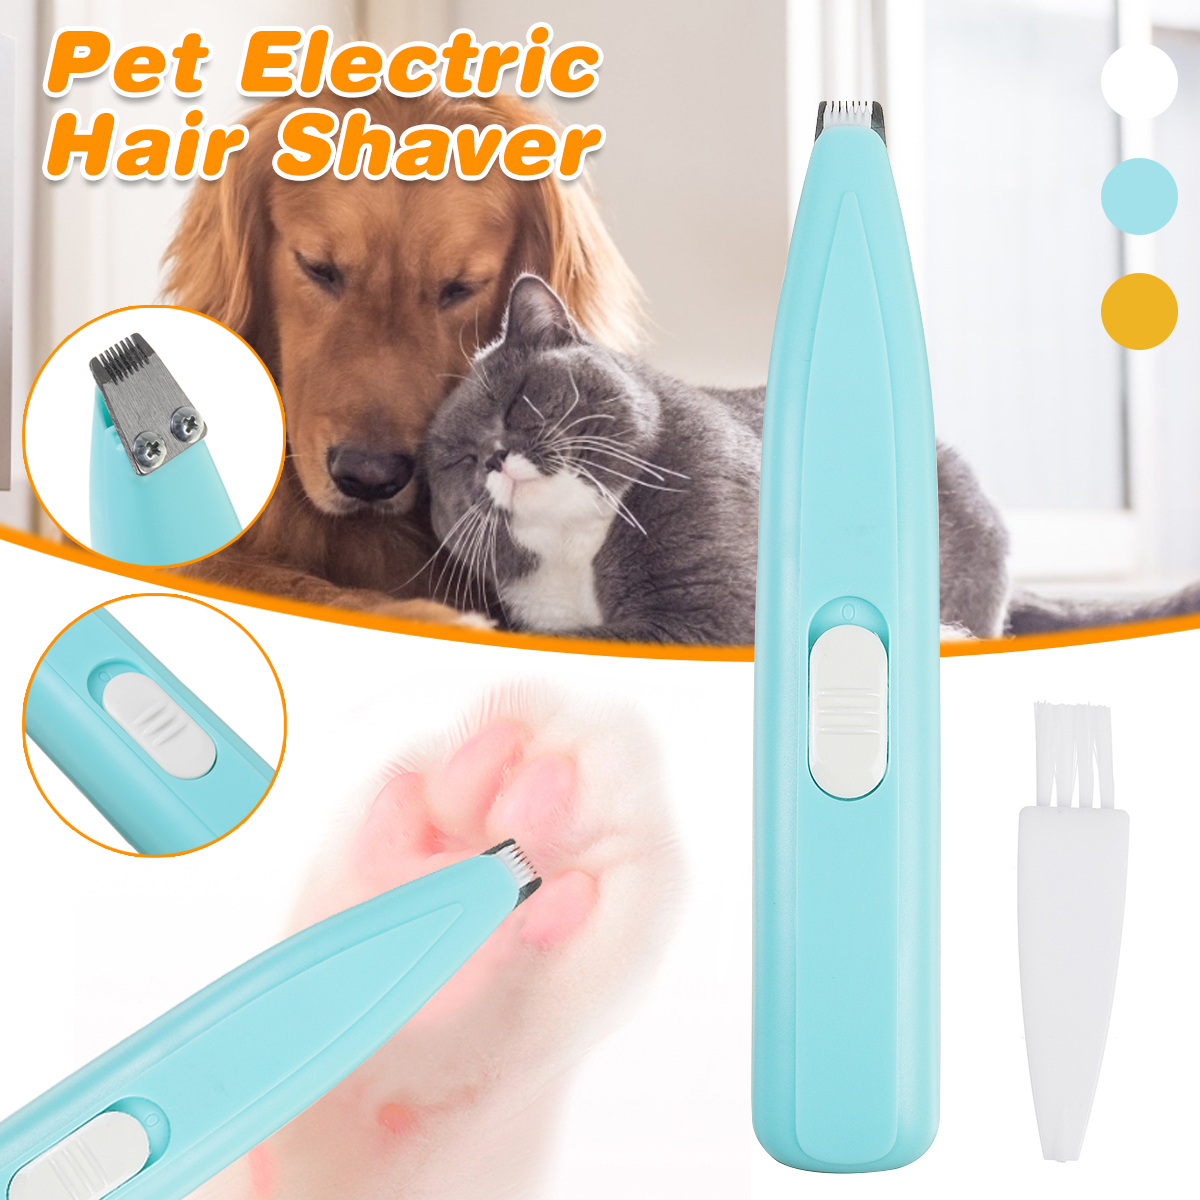 Dog-Cat-Foot-Hair-Trimmer-Pet-Grooming-Electrical-Hair-Clipper-Shaving-Trimming-Pet-Supplies-1940485-2